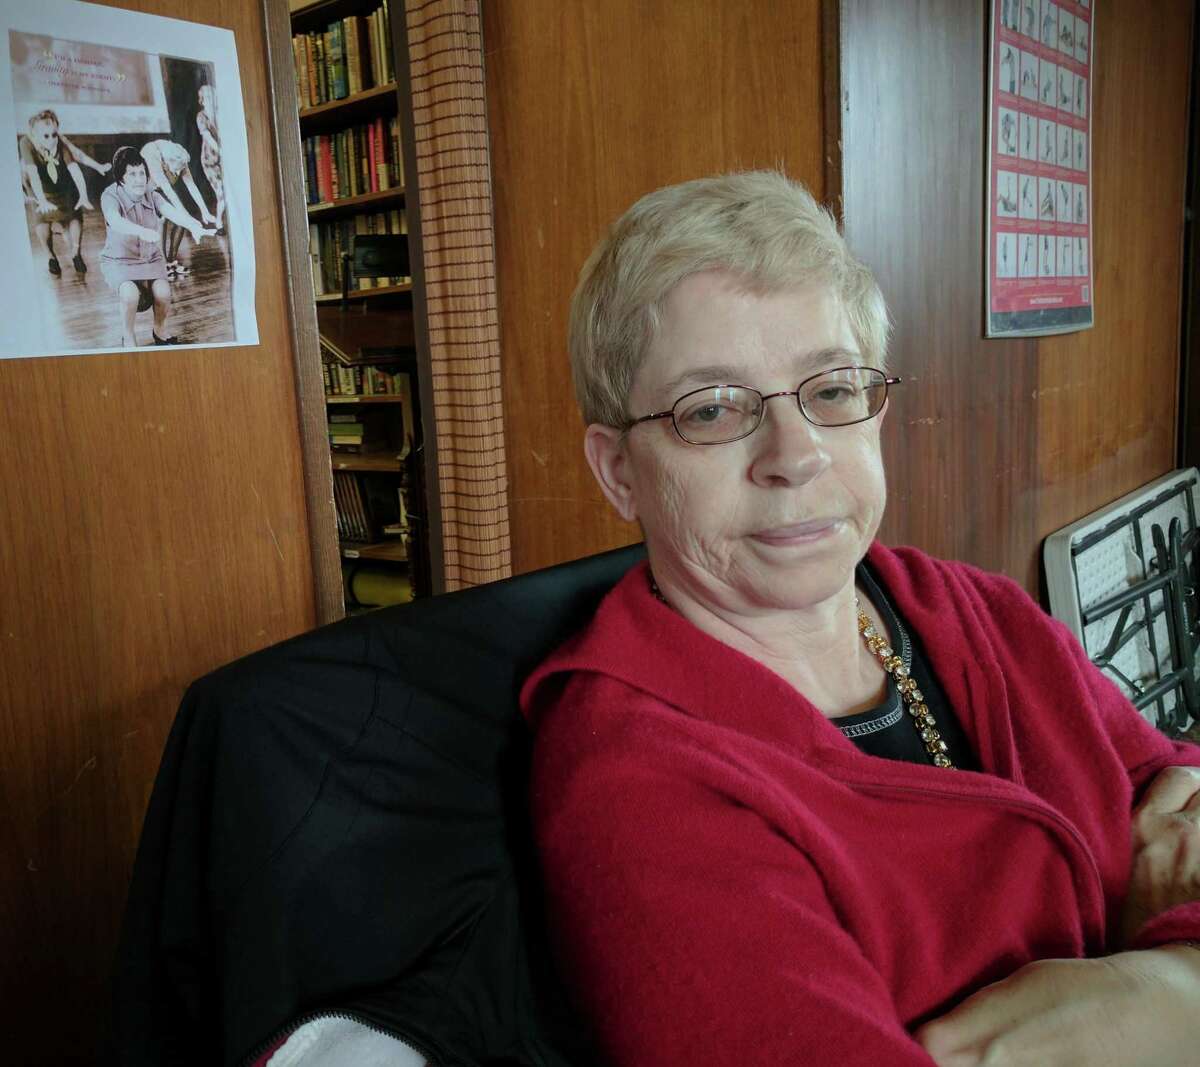 Helen Muir, 59, comes to the senior center every day for classes.